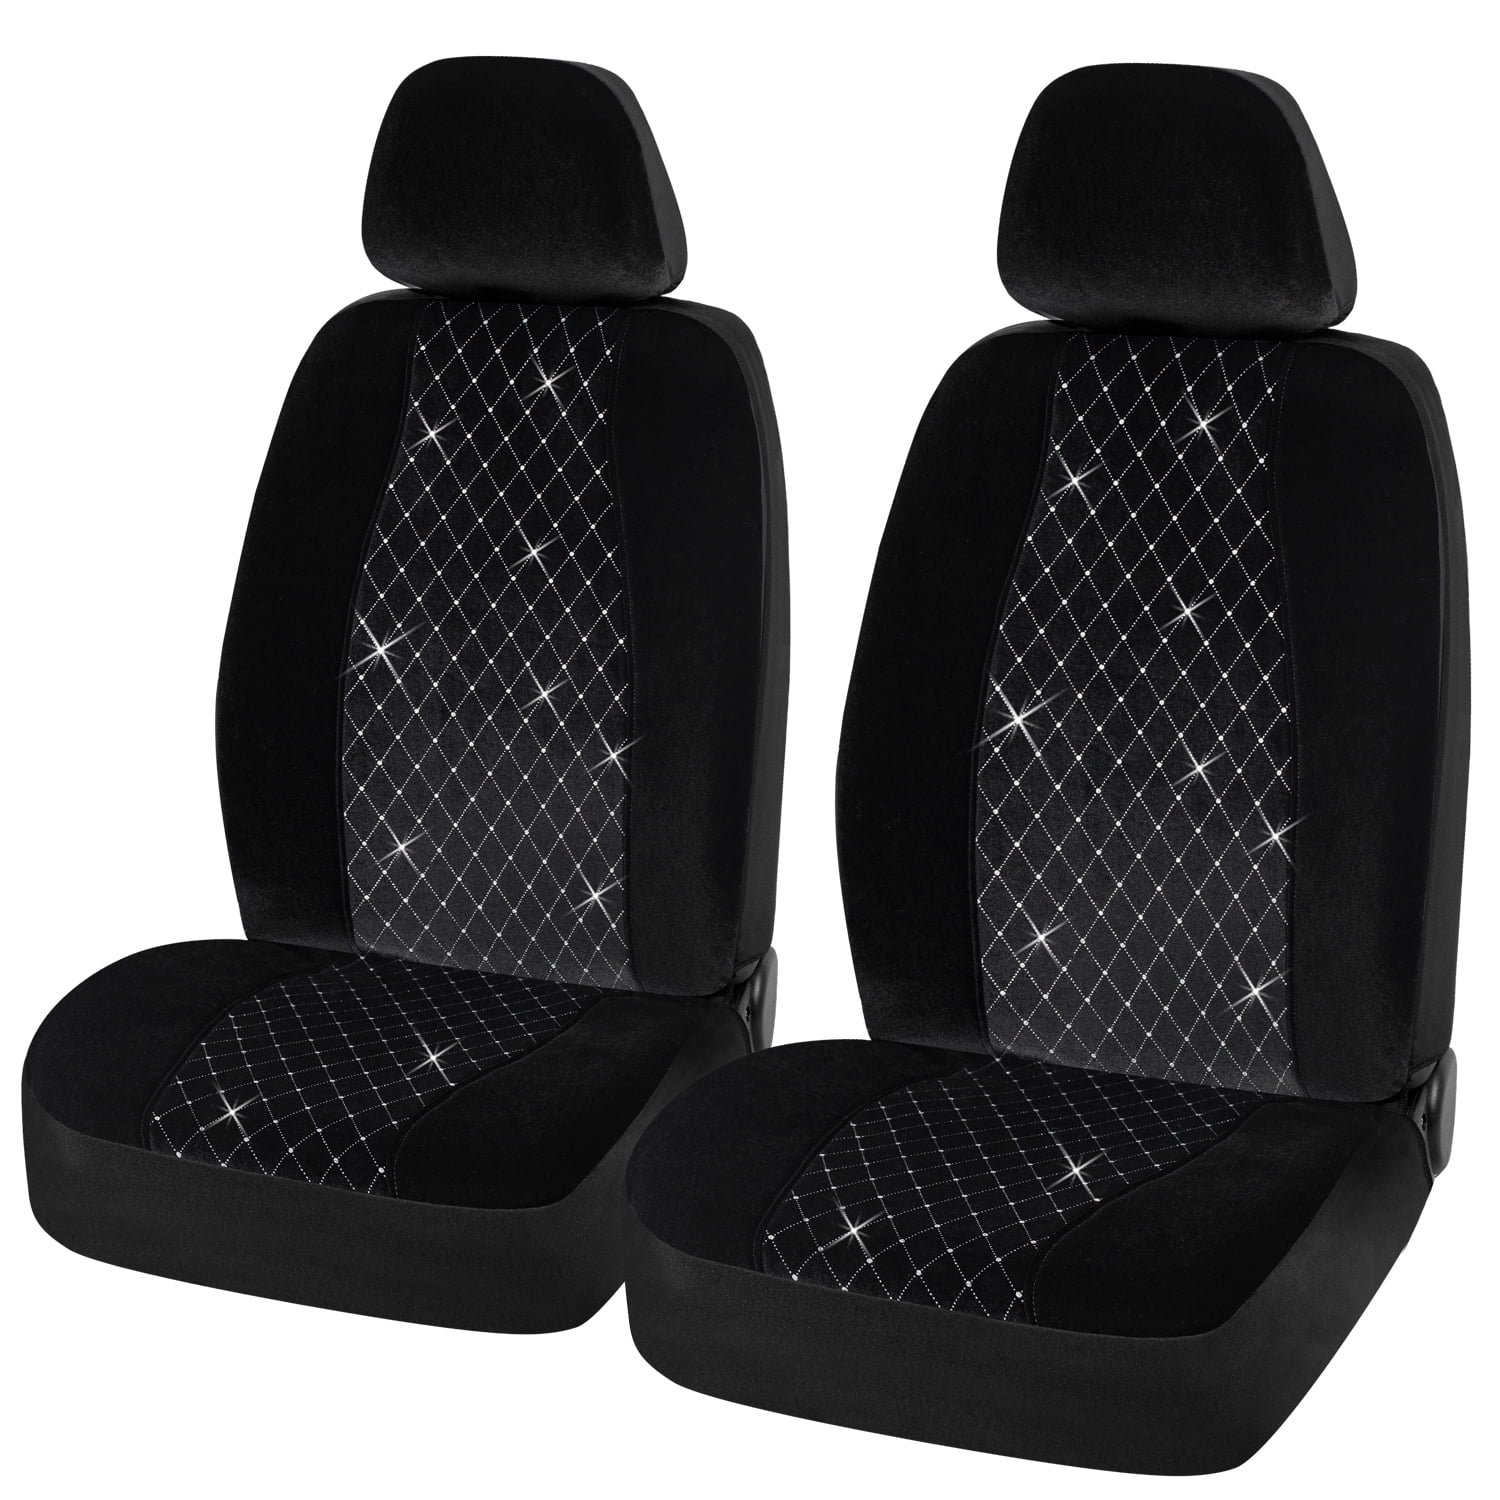 Full Interior Seat Covers Set Solid Black Auto Car SUV w/ Steering Wheel Cover